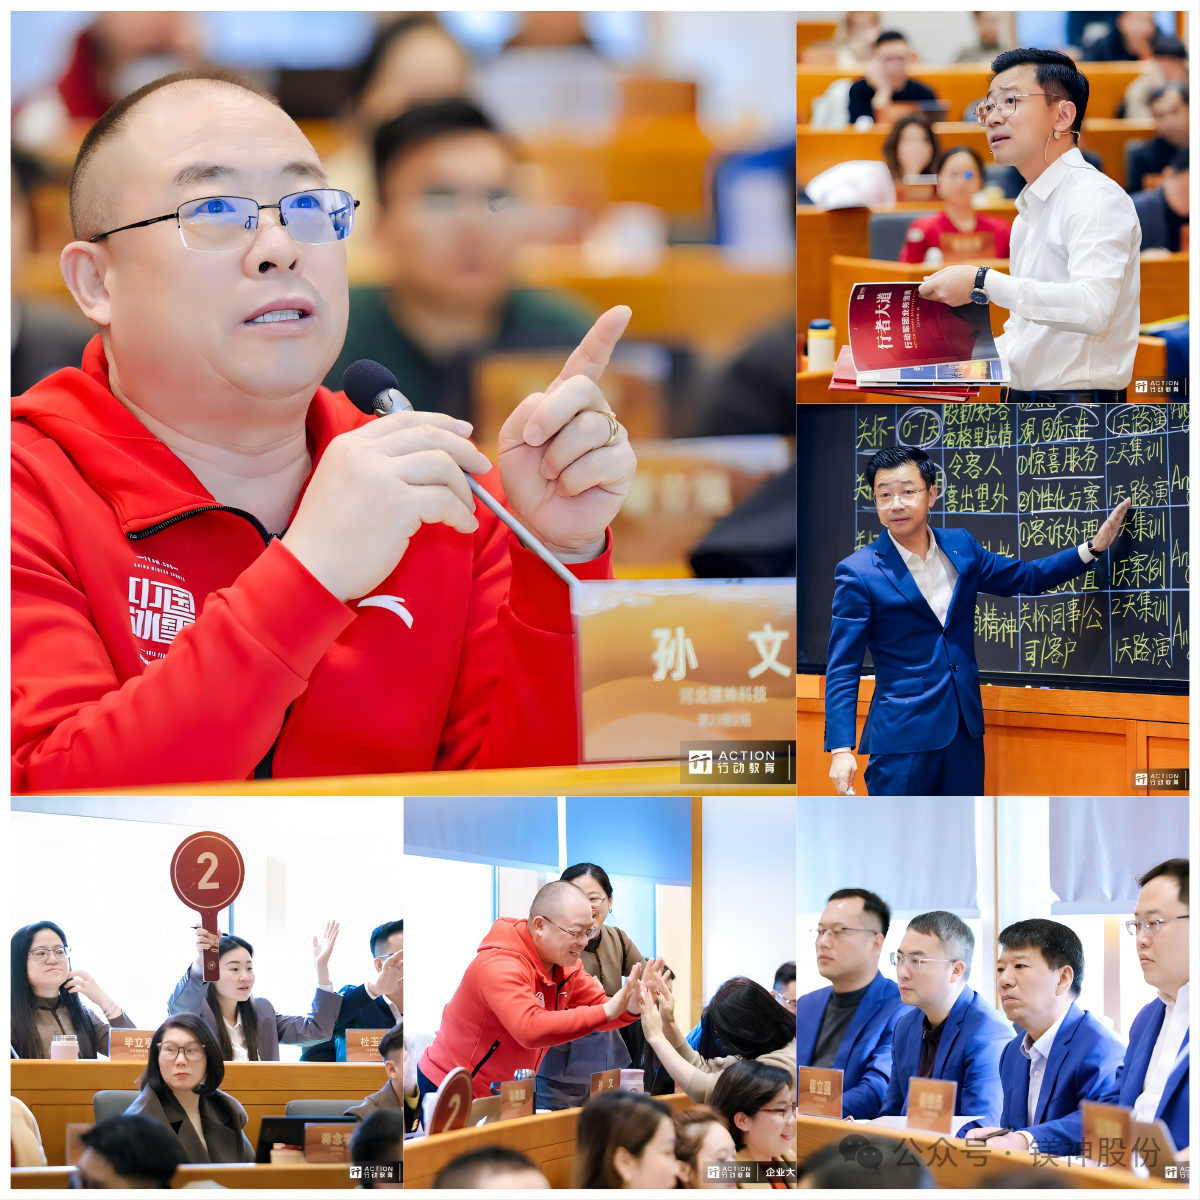 Action Education President Hui's Joint Counseling for Enterprises and Universities